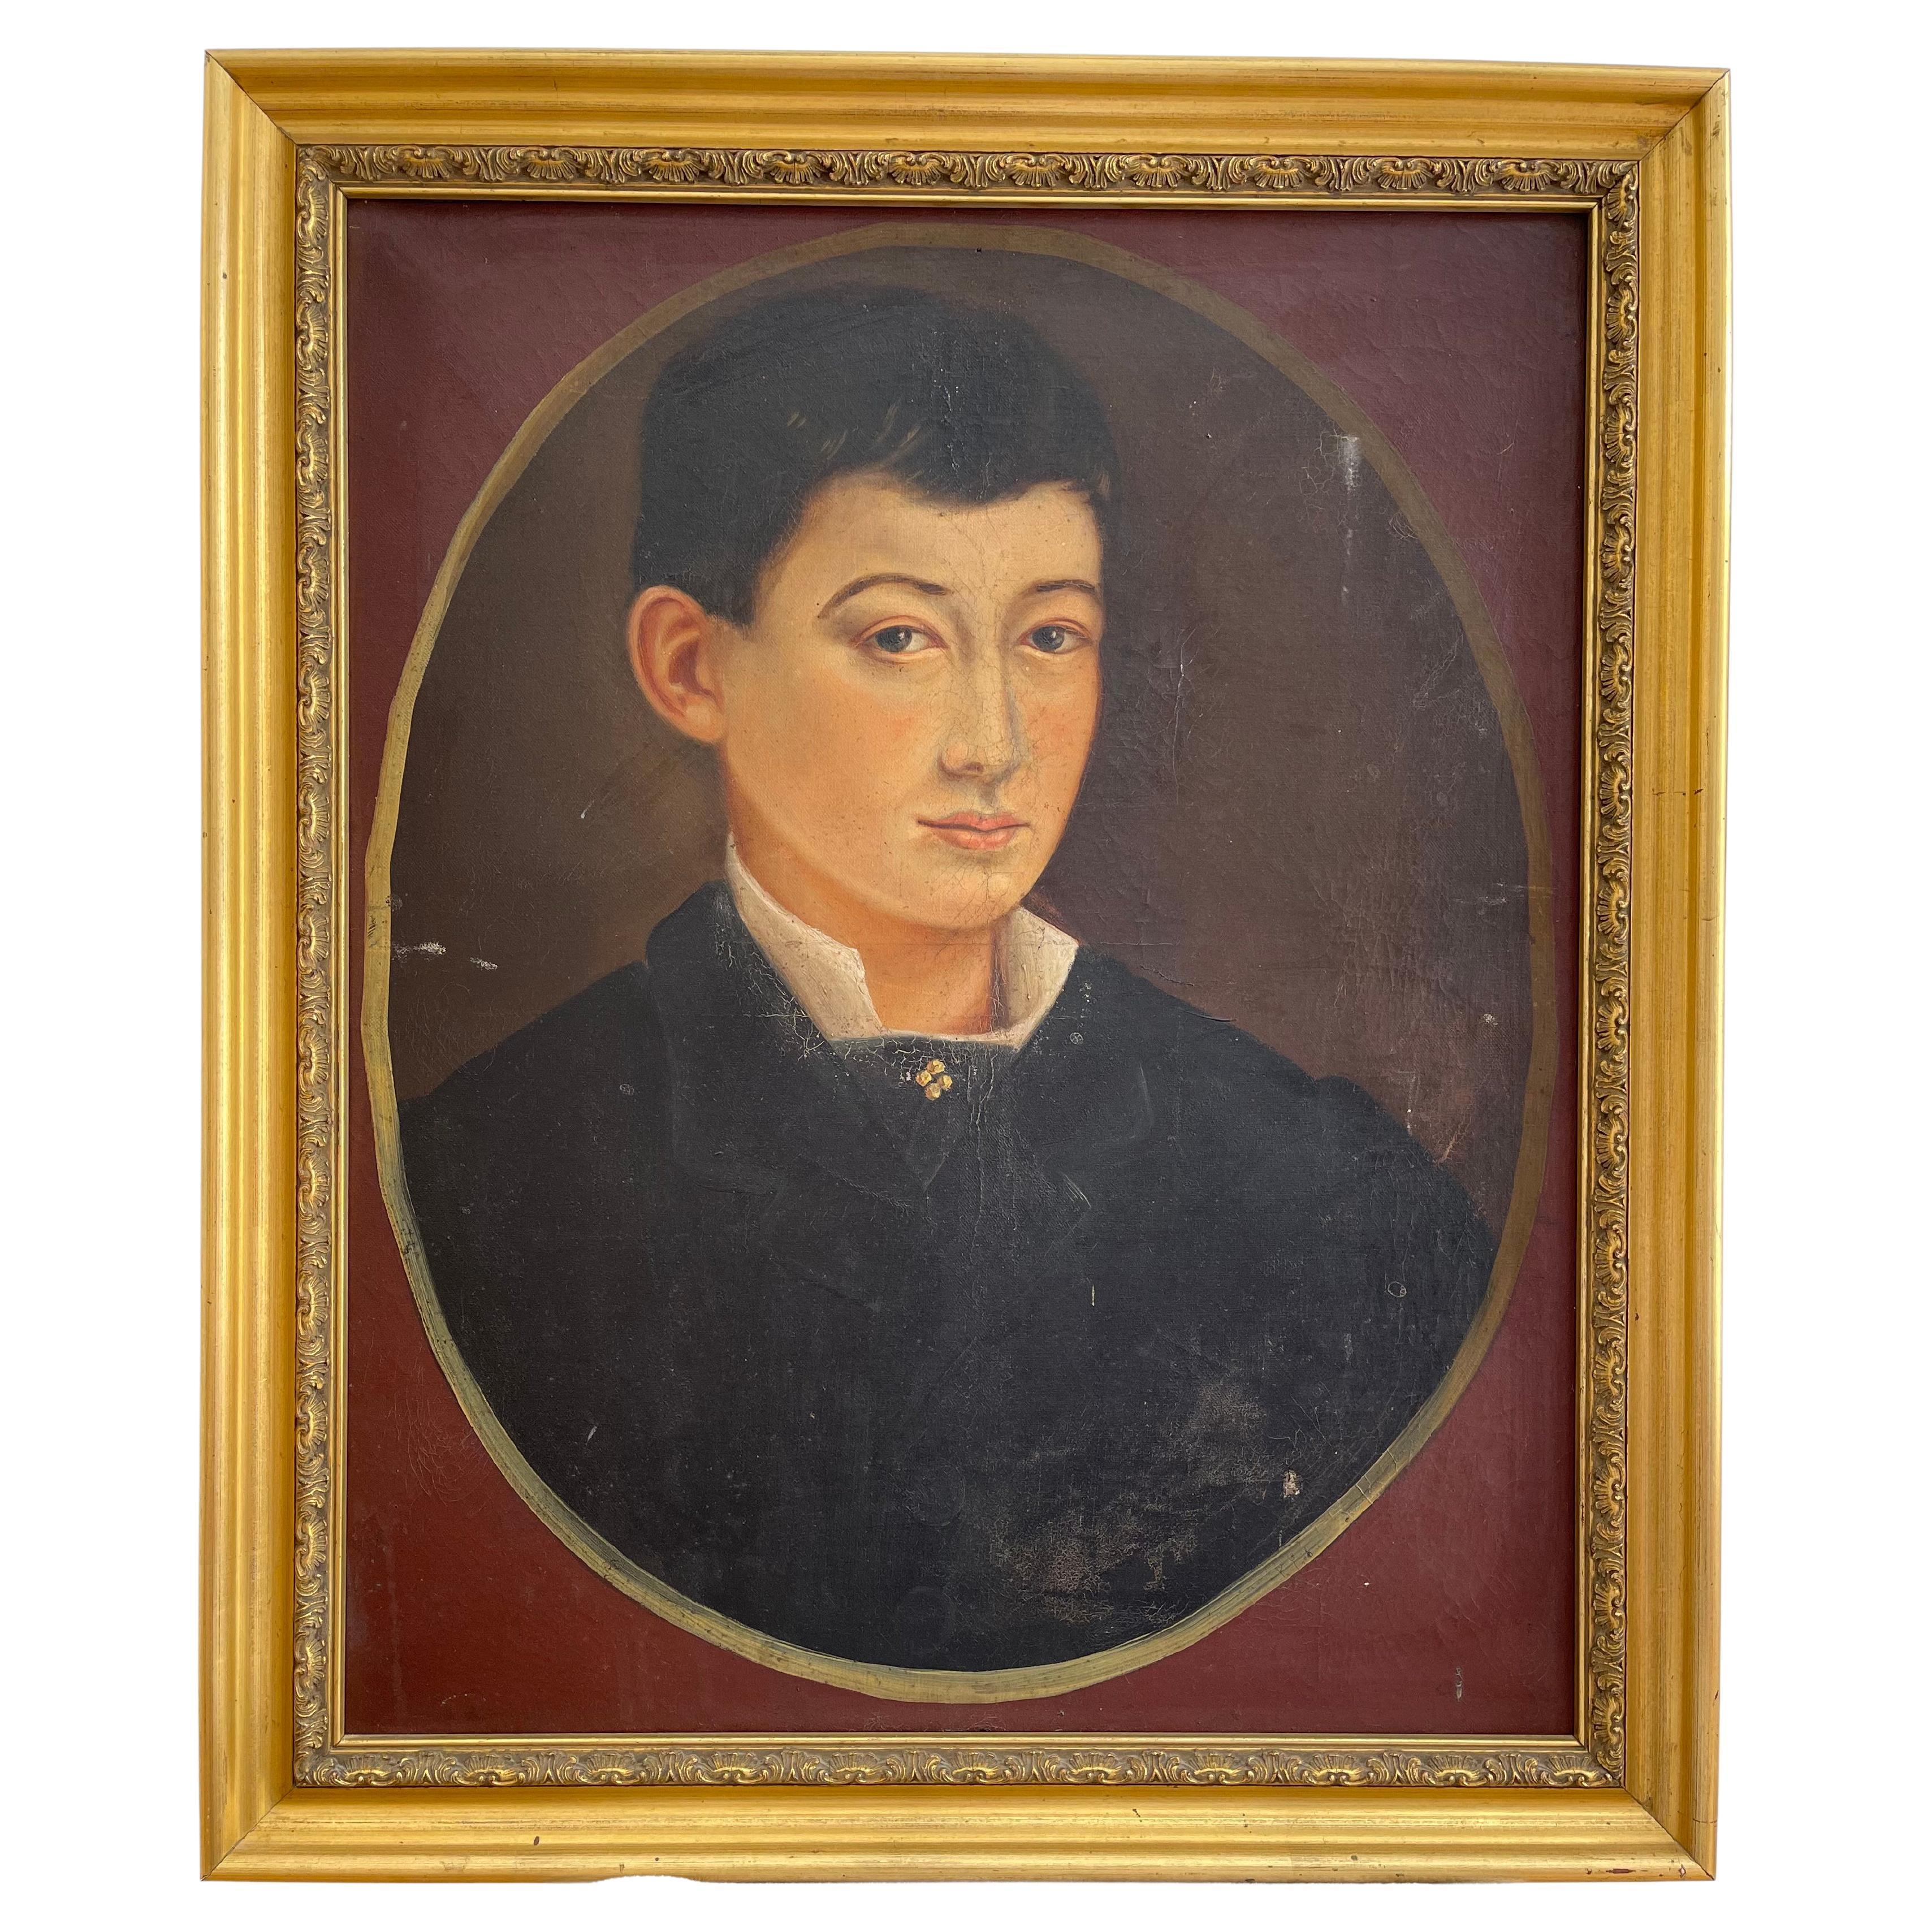 Portrait of a Young Boy, Oil on Canvas, 19th Century